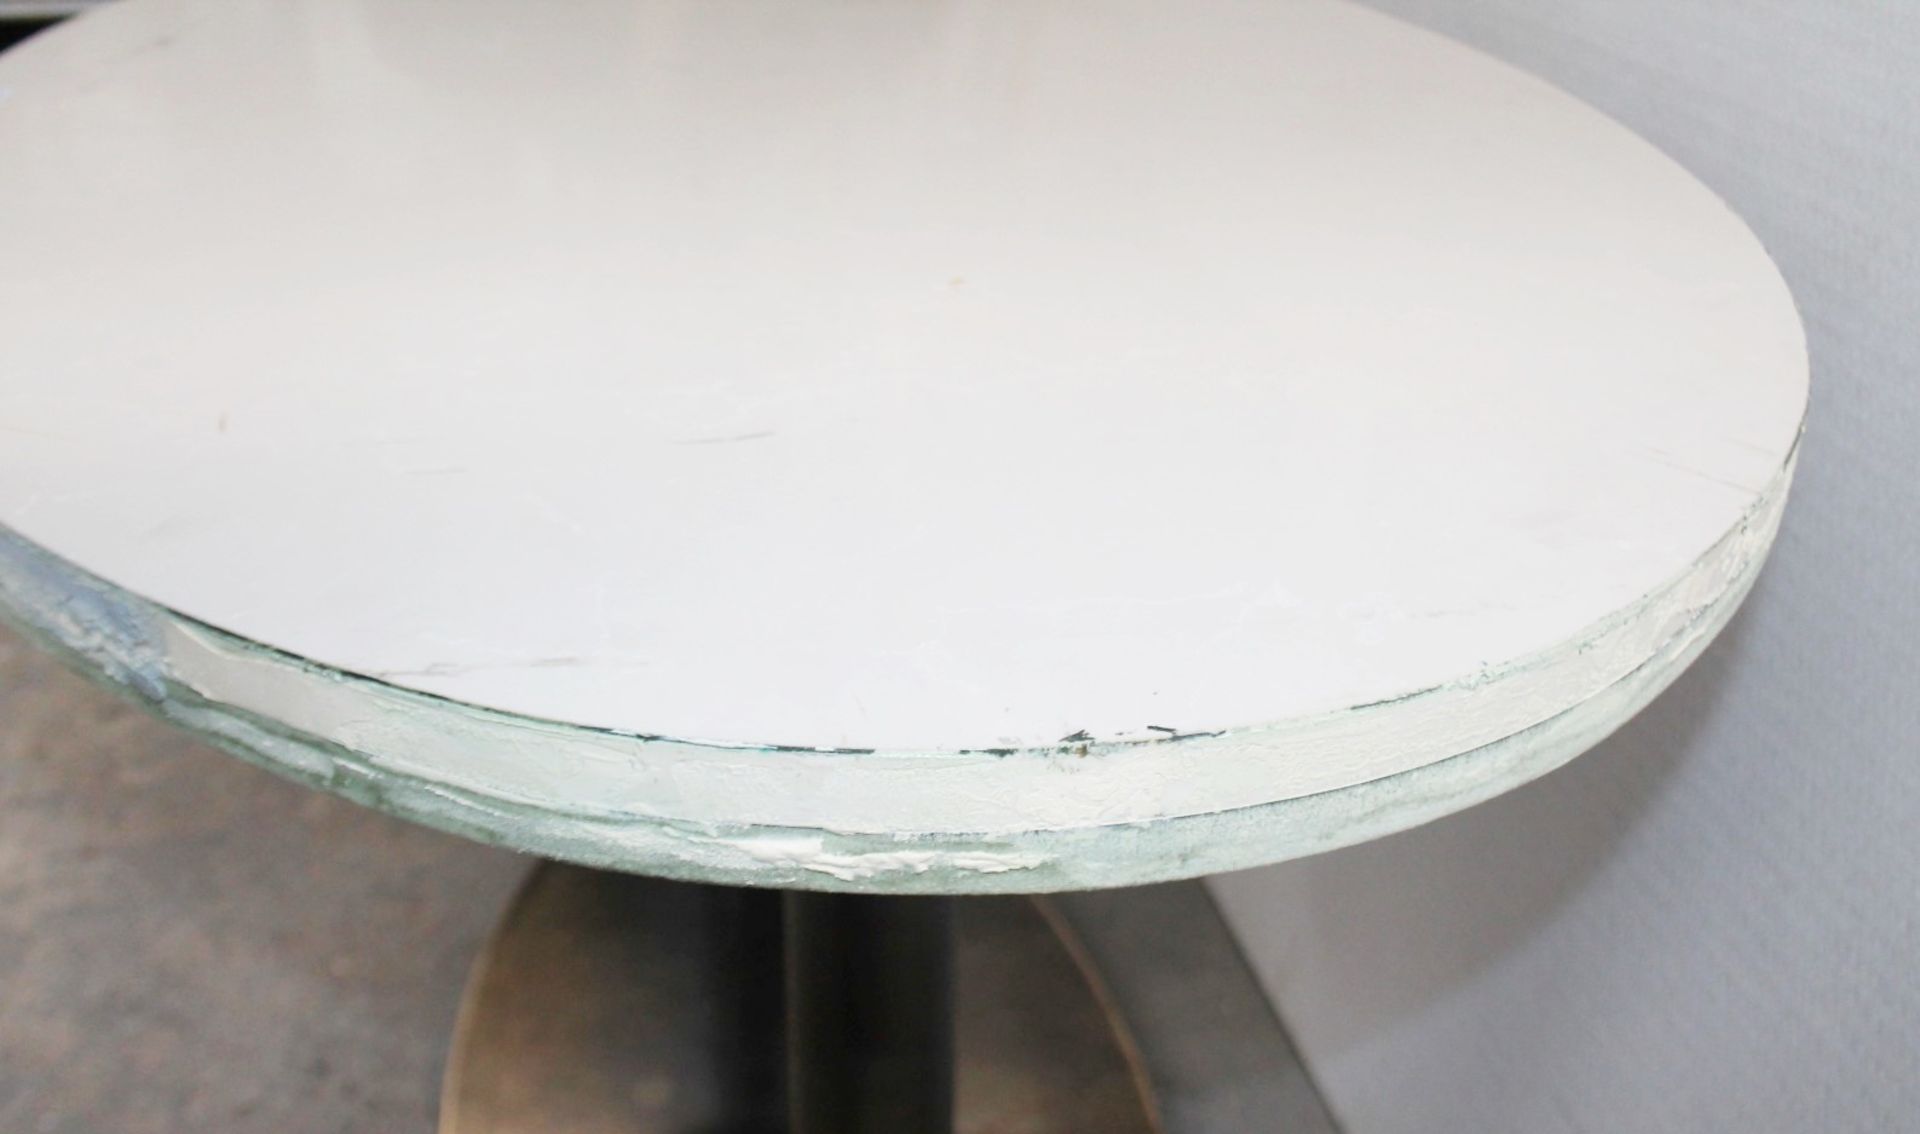 A Pair Of Oval Commercial Bistro Tables With A Brass Trim And Sturdy Metal Bases *Read Description* - Image 5 of 7